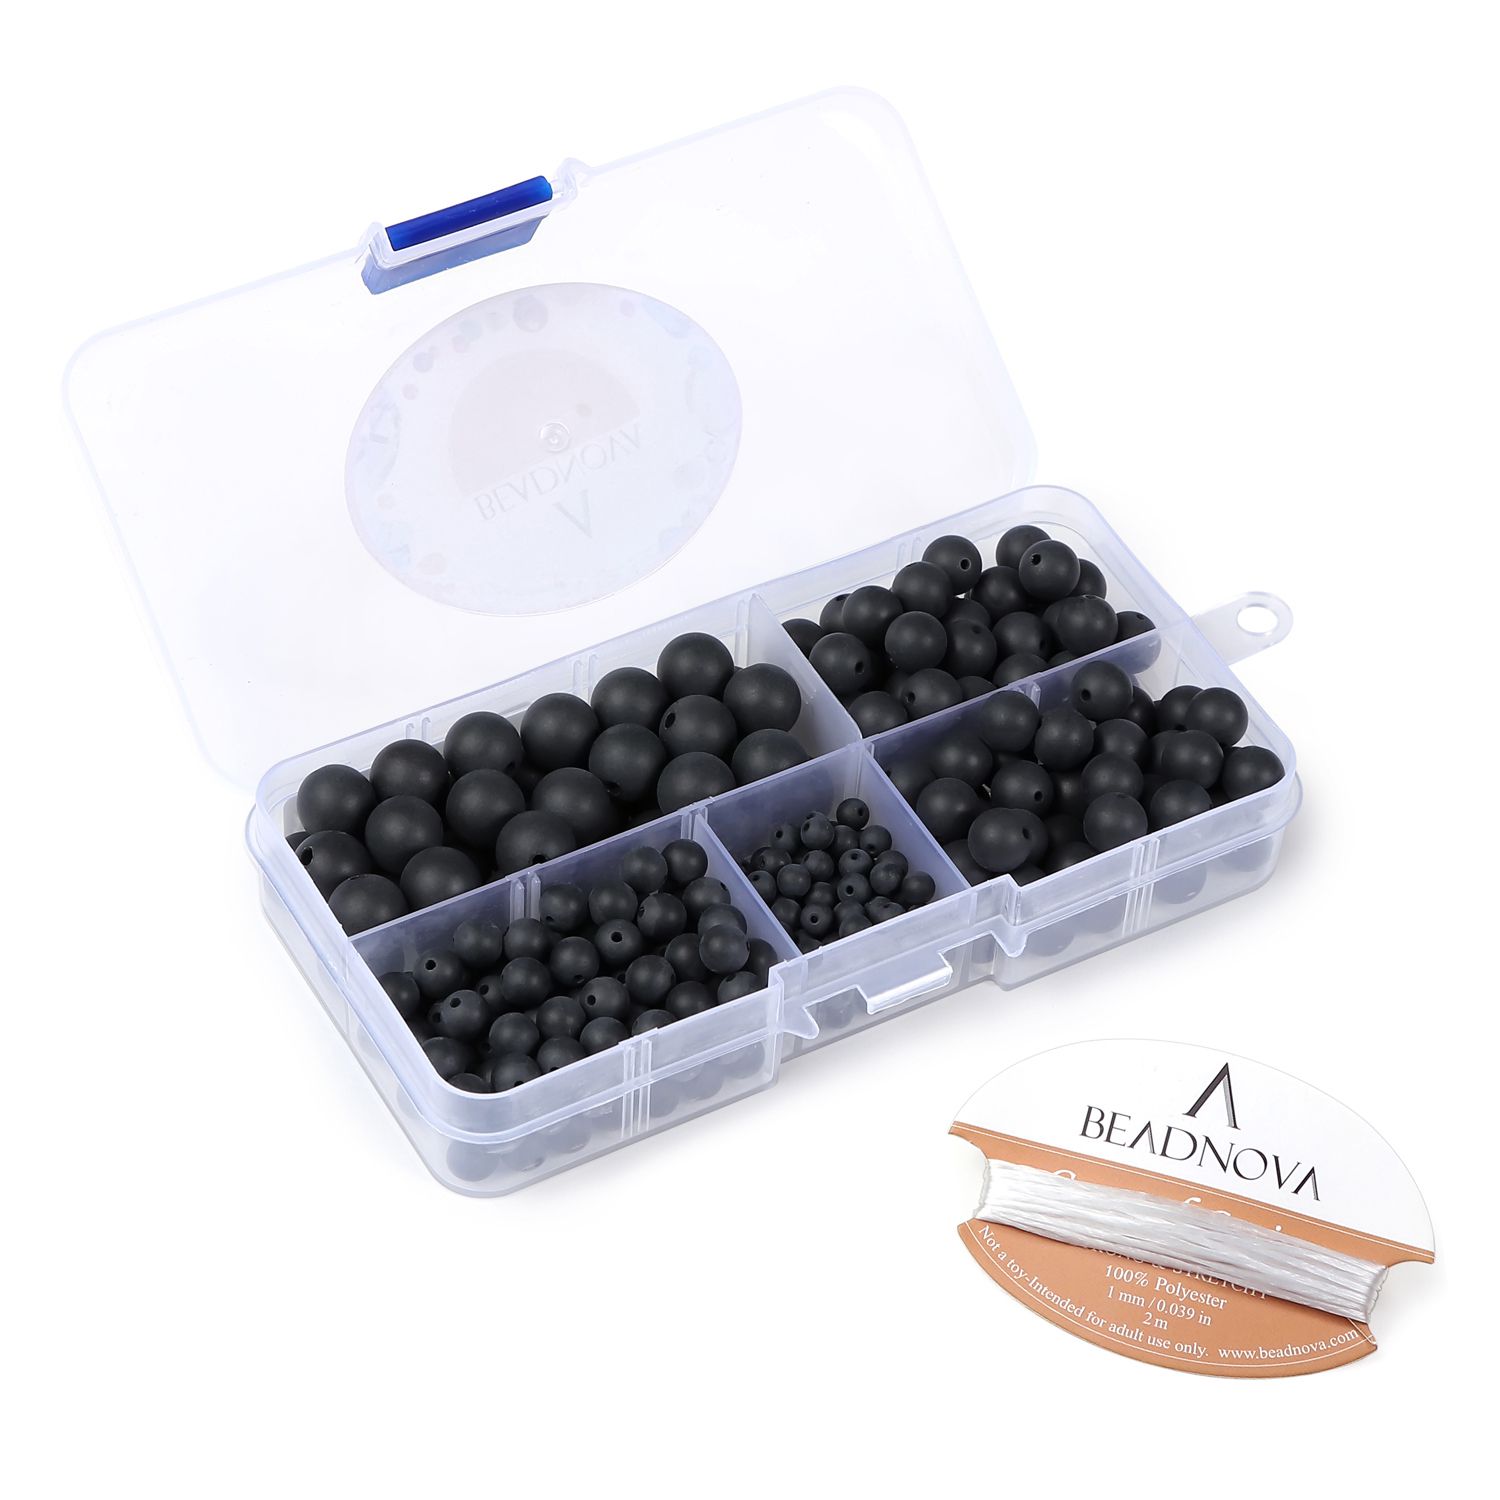 BEADNOVA 8mm Natural Black Lava Beads Stone Gemstone Round Loose Energy Healing Beads with Free Crystal Stretch Cord for Jewelry Making (40-42pcs)